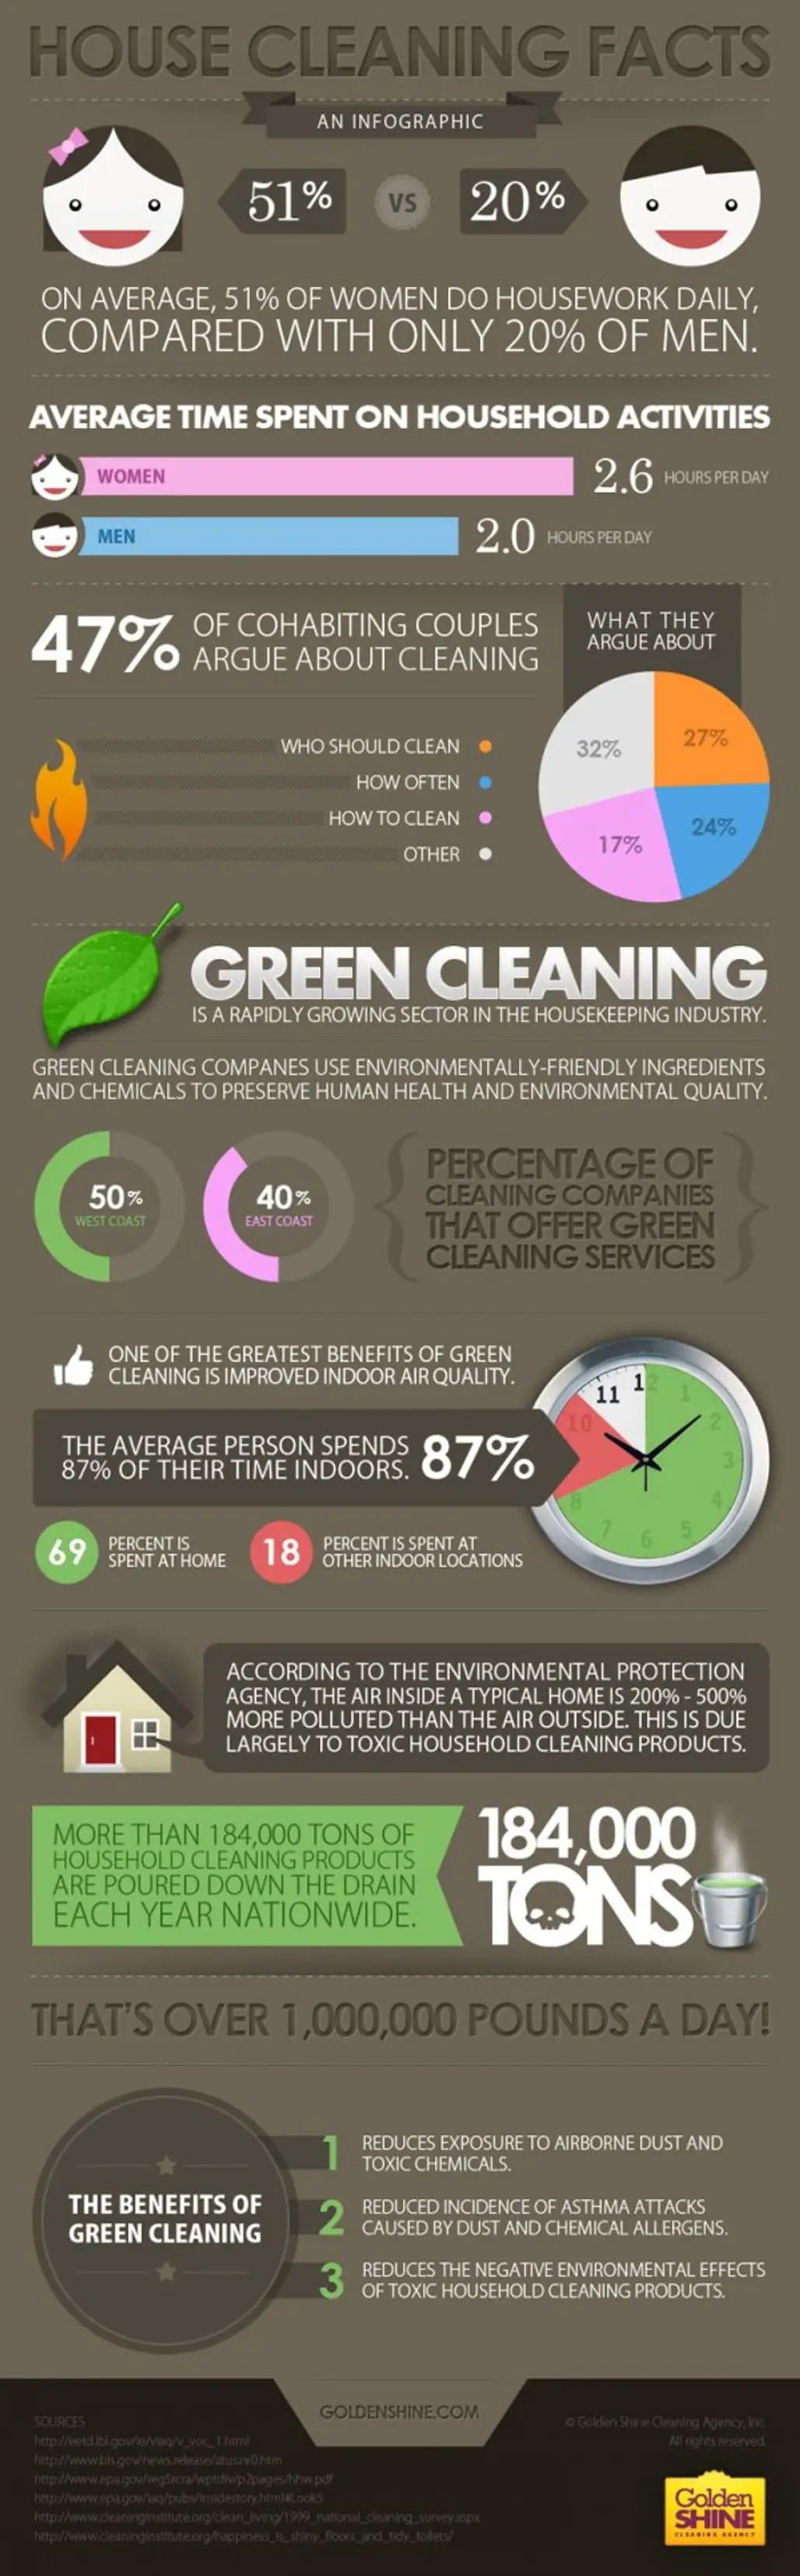 Some House Cleaning Facts